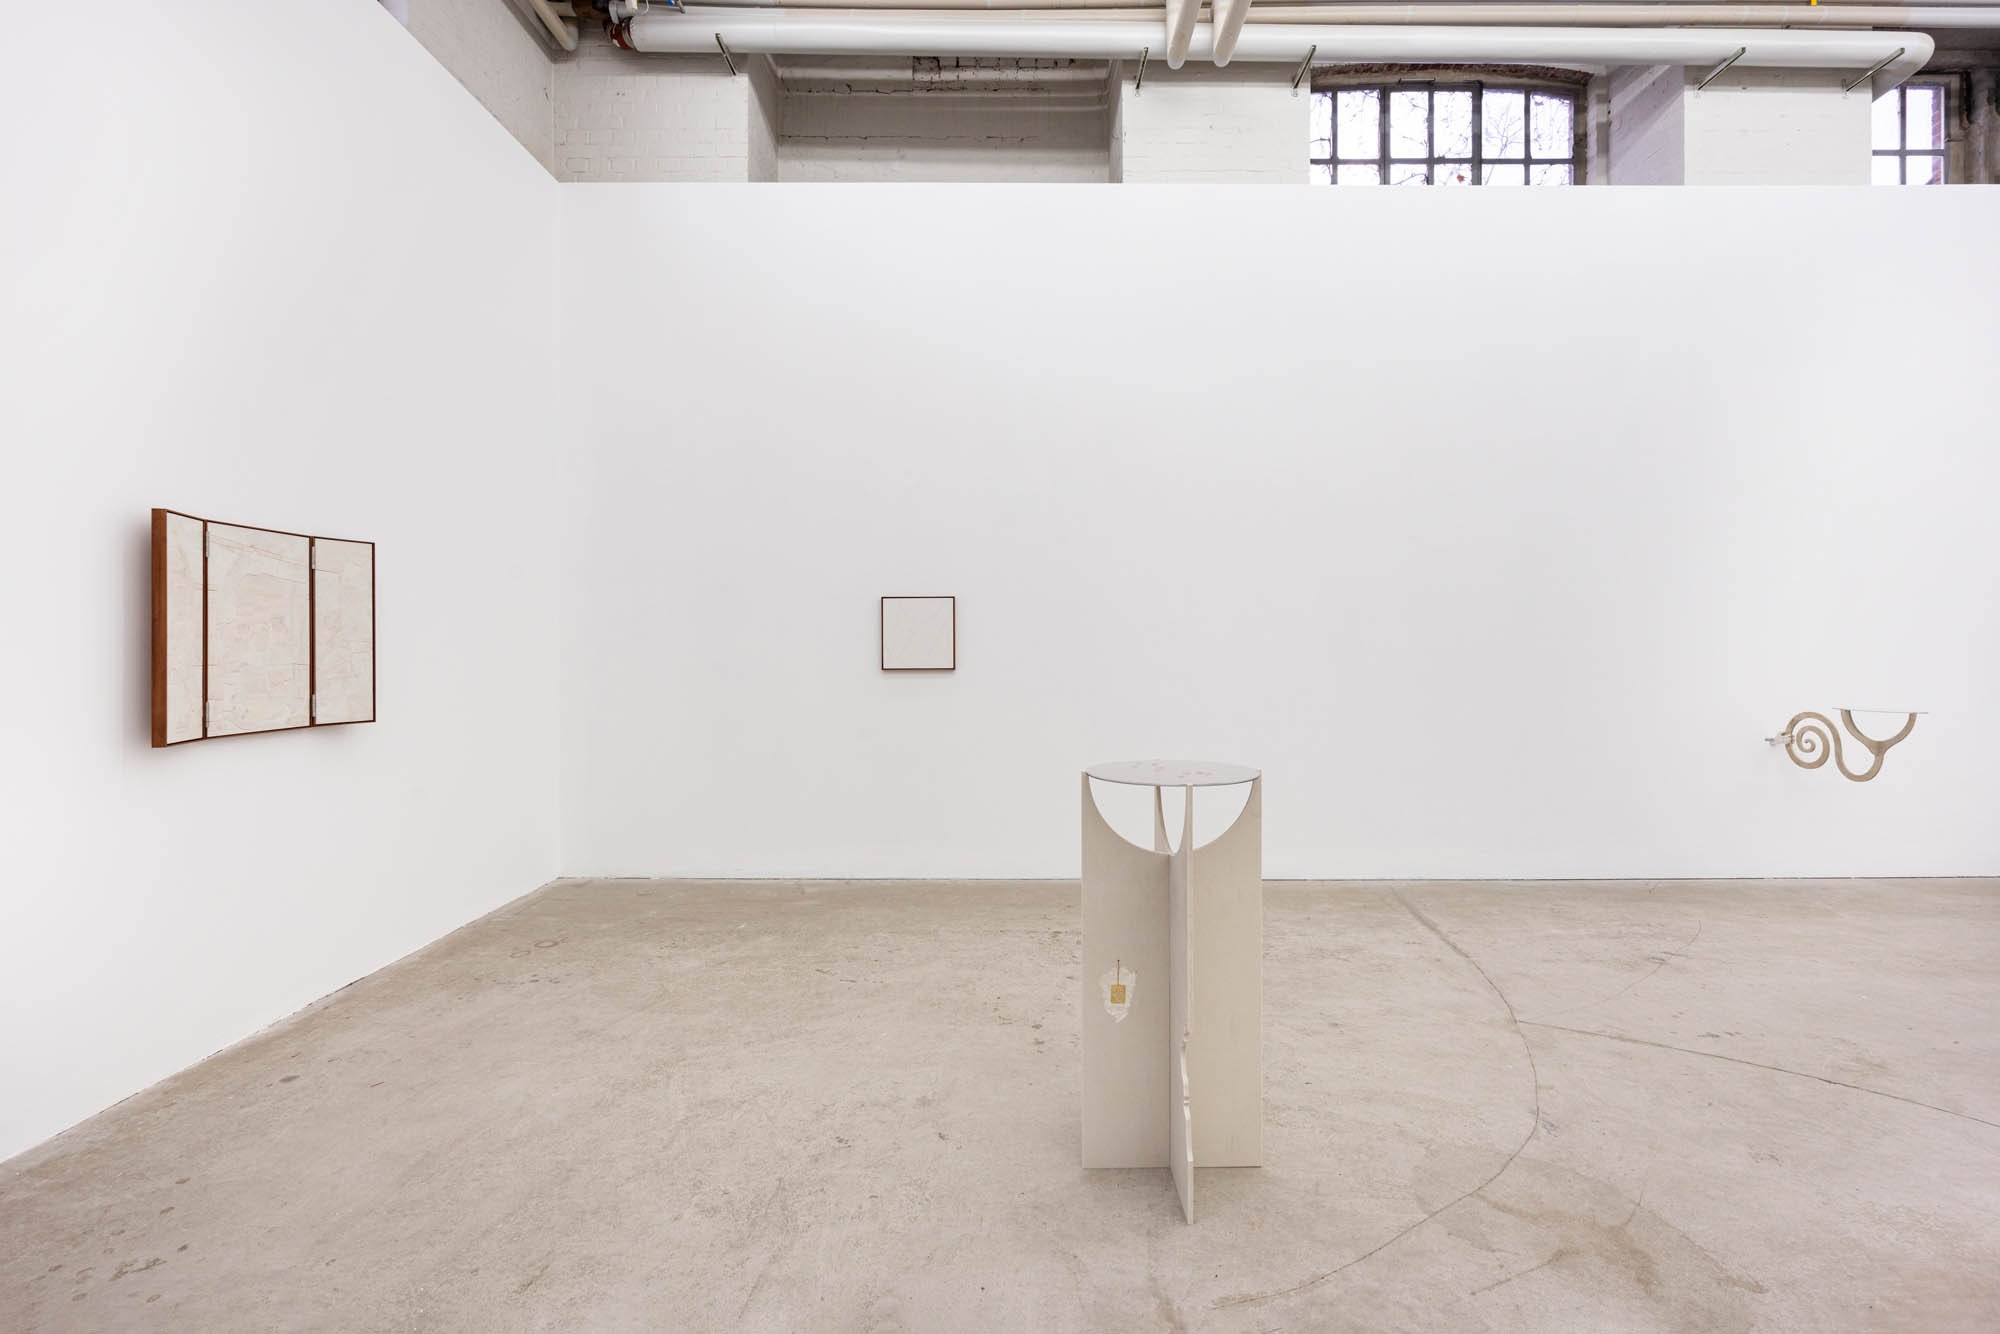 Exhibition view at Galerie Tobias Naehring